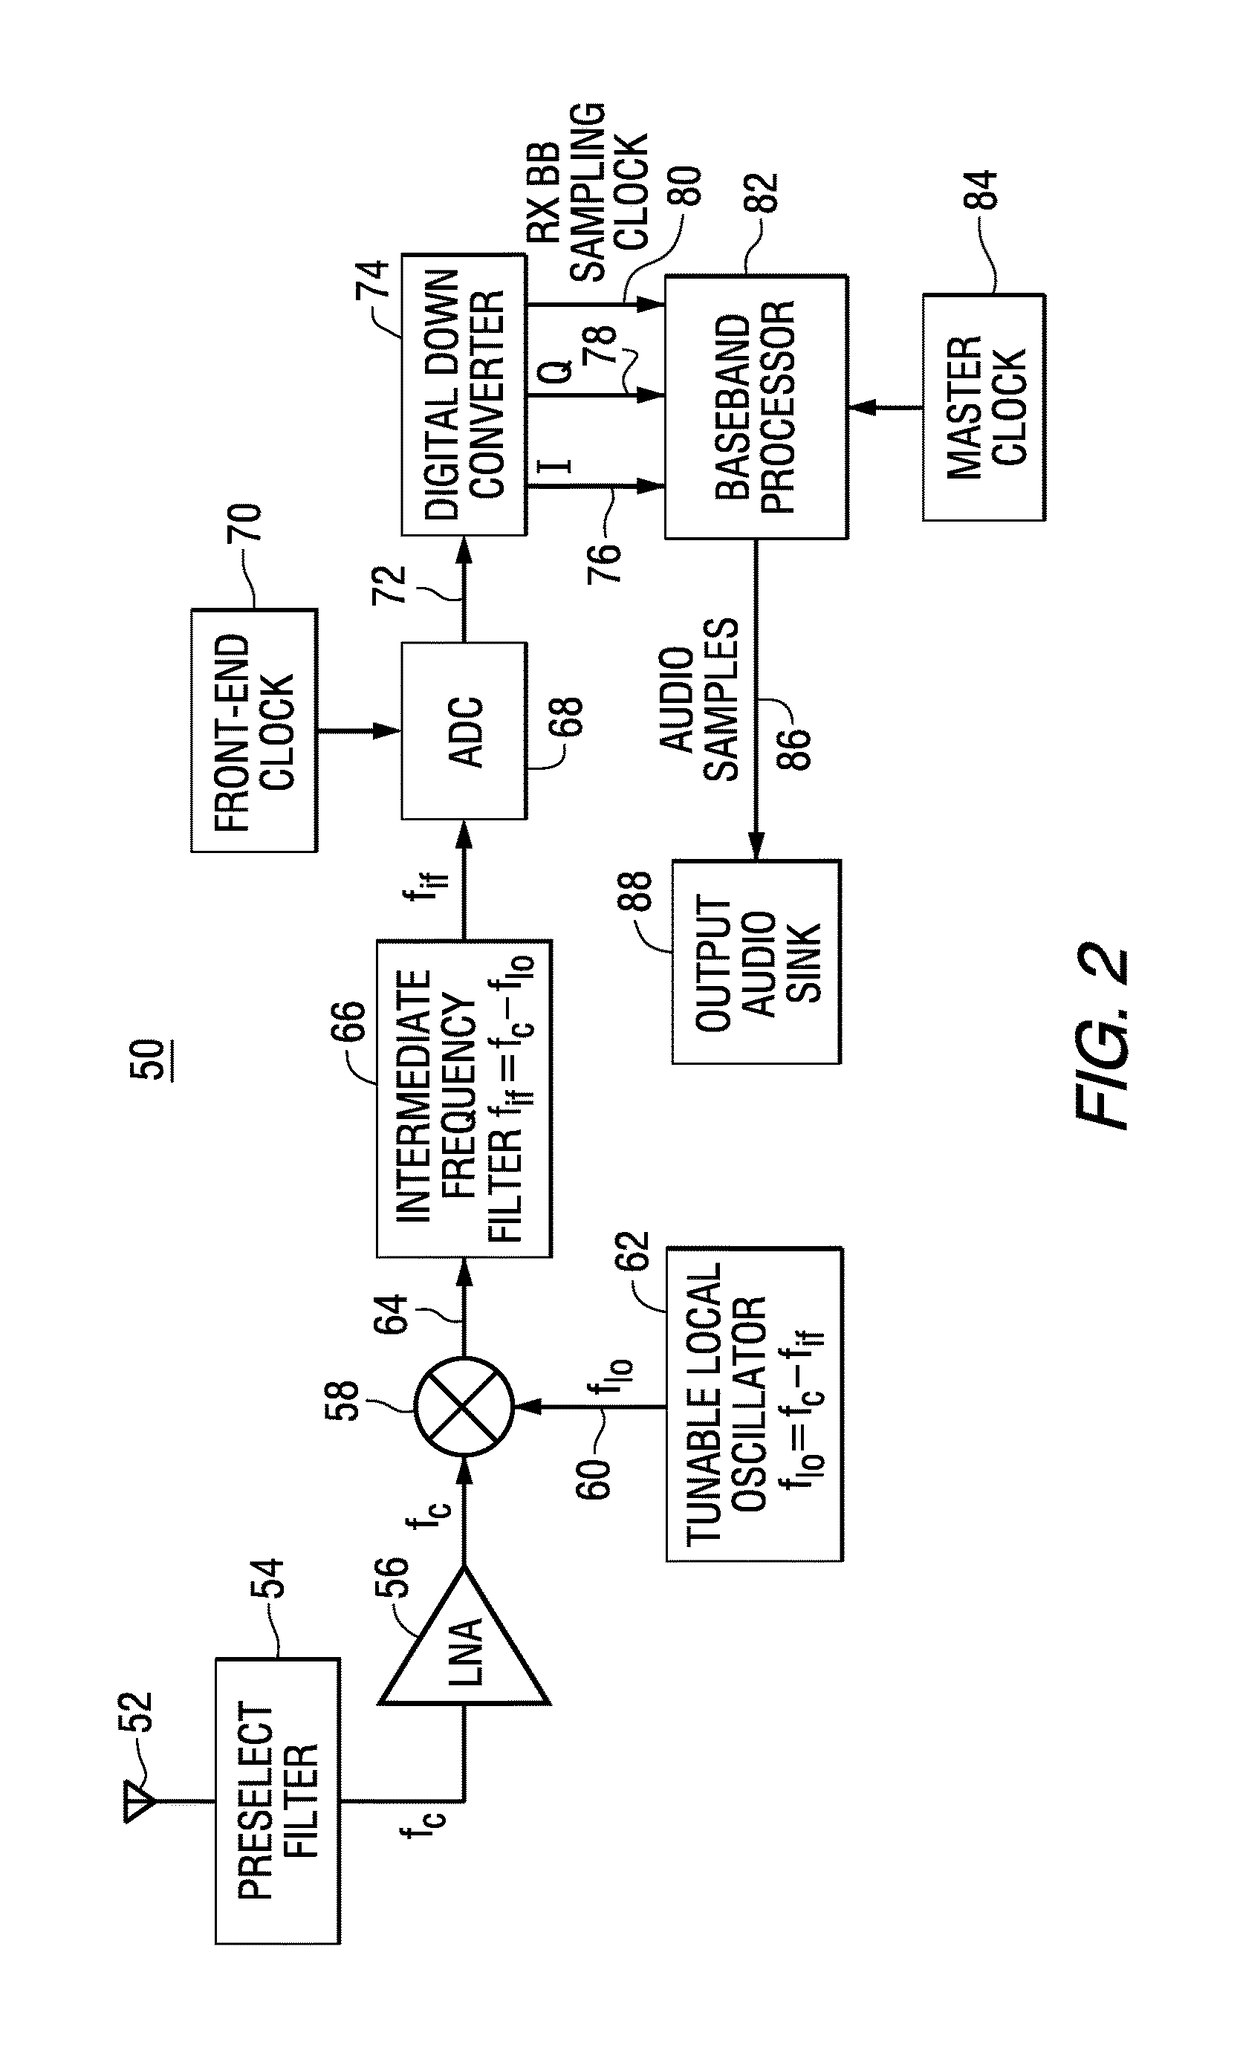 Method and apparatus for level control in blending an audio signal in an in-band on-channel radio system